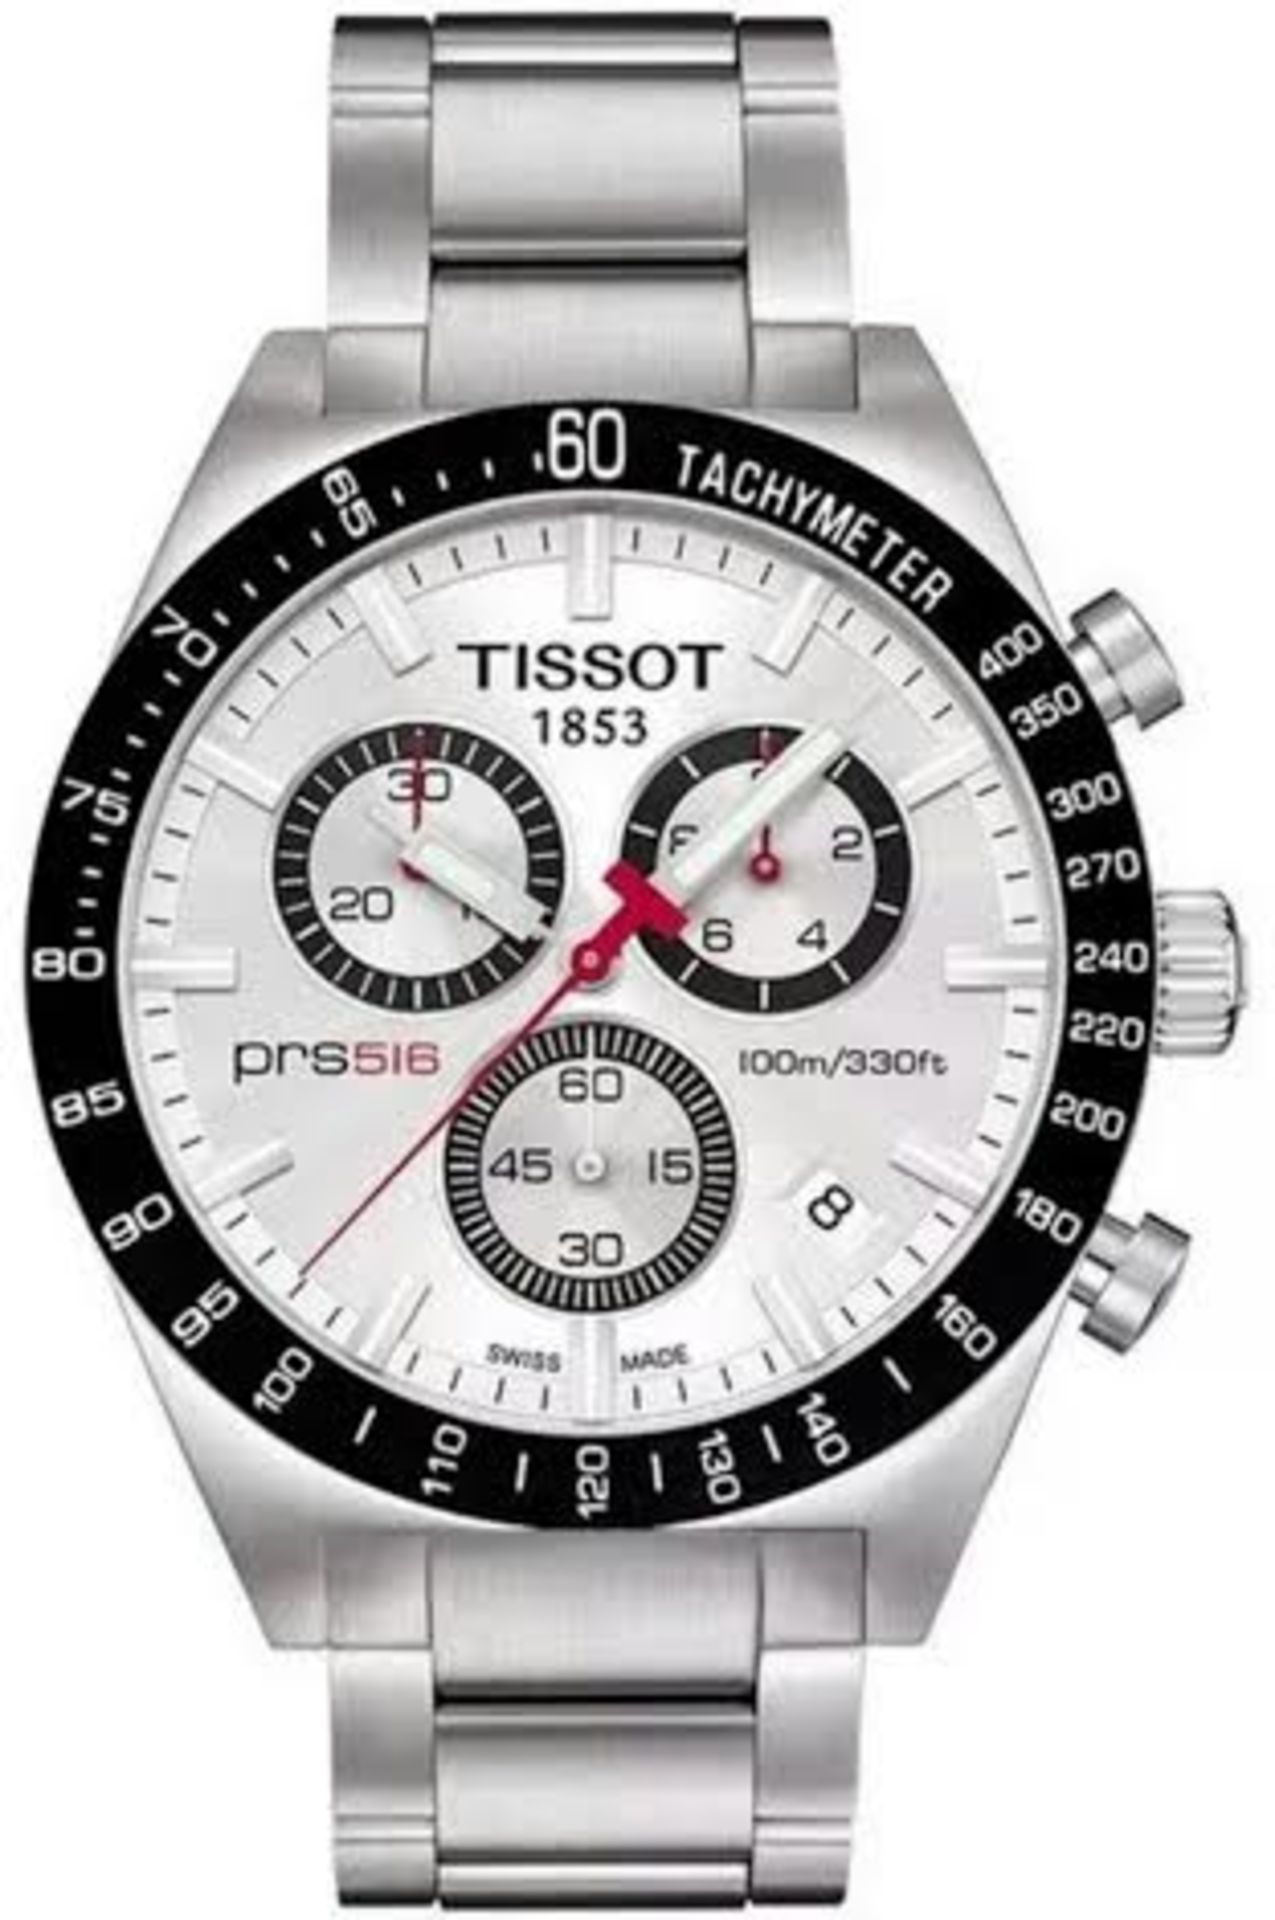 BRAND NEW TISSOT, T044.417.21.031.00, GETS POLISHED STAINLESS STEEL BRACELET WATCH, WITH A WHITE